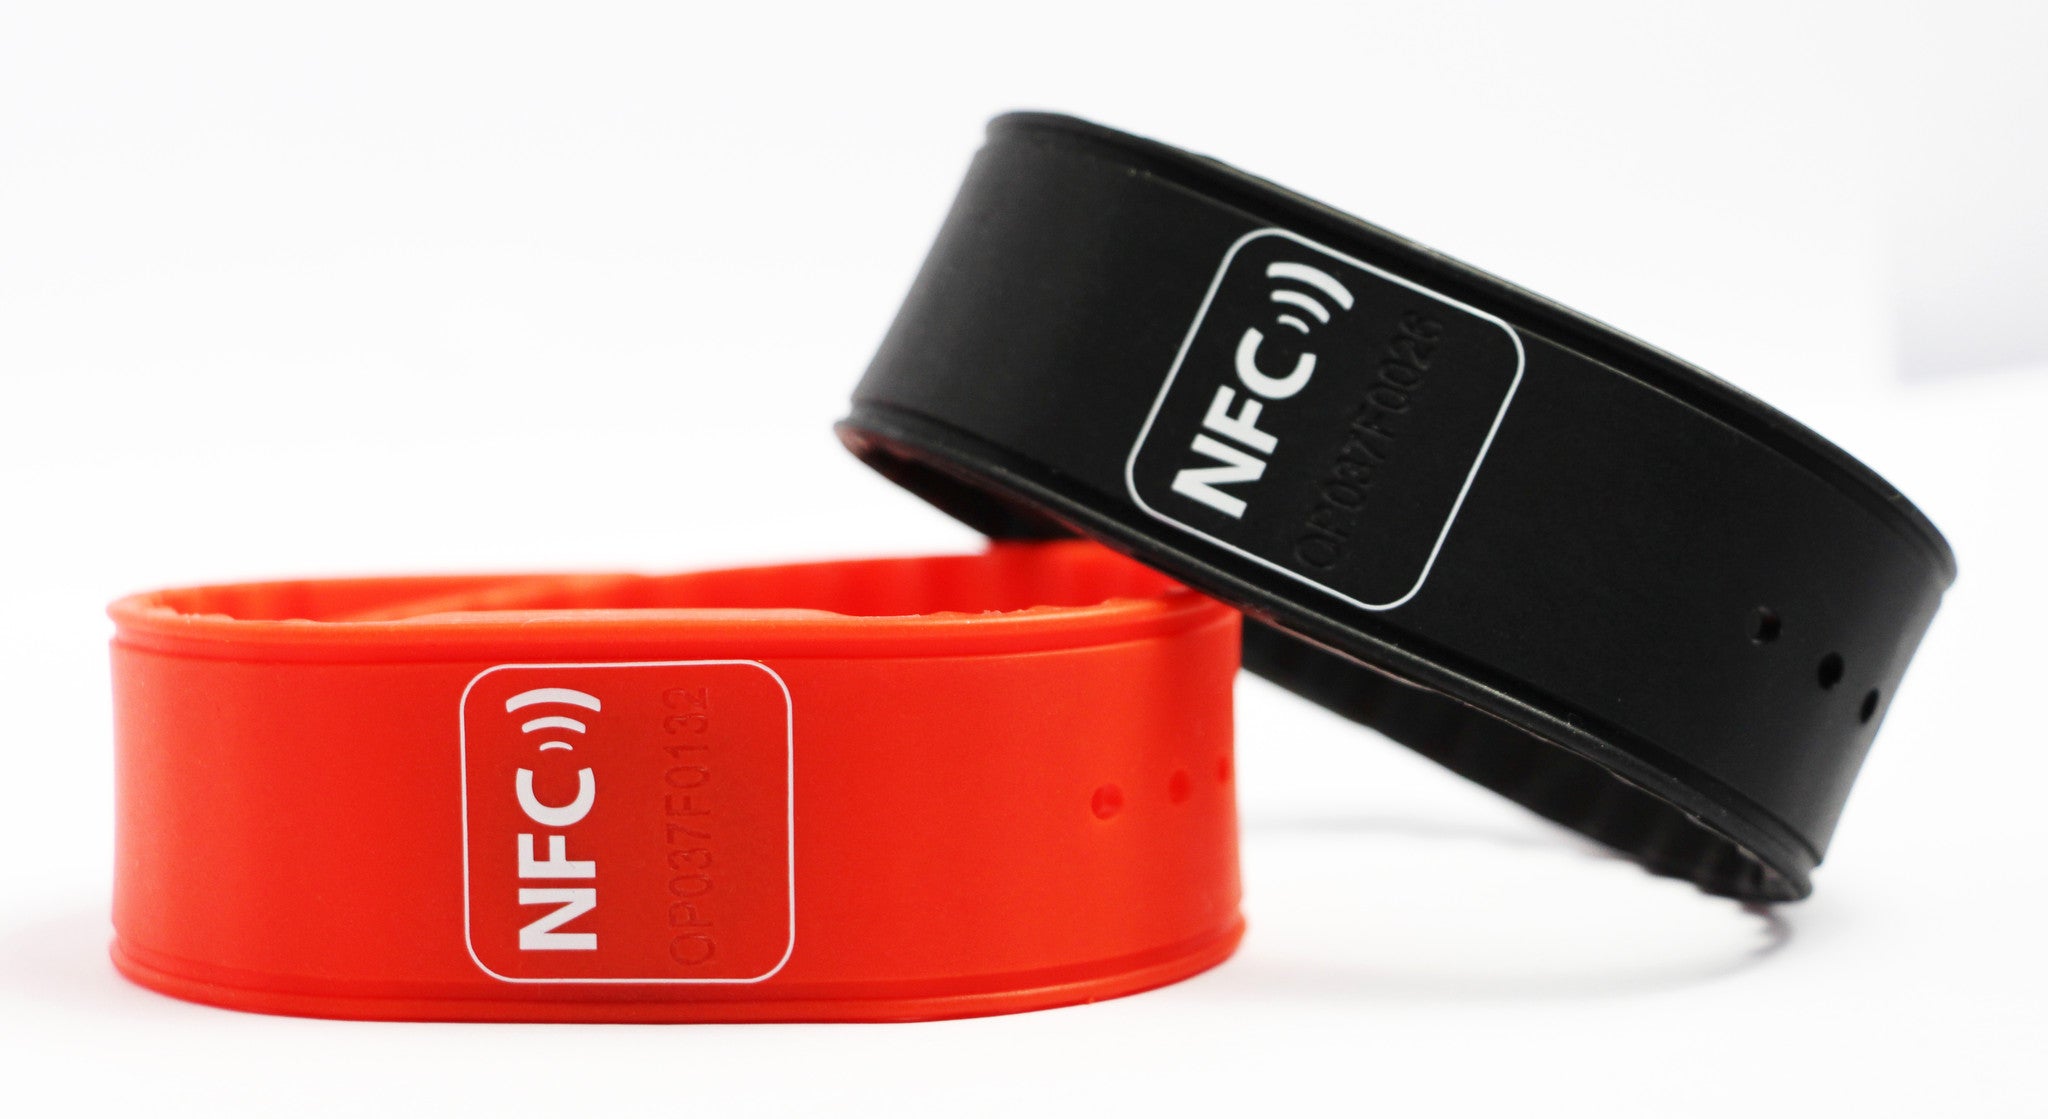 Adjustable Wristband OP037 with EM4200 chip